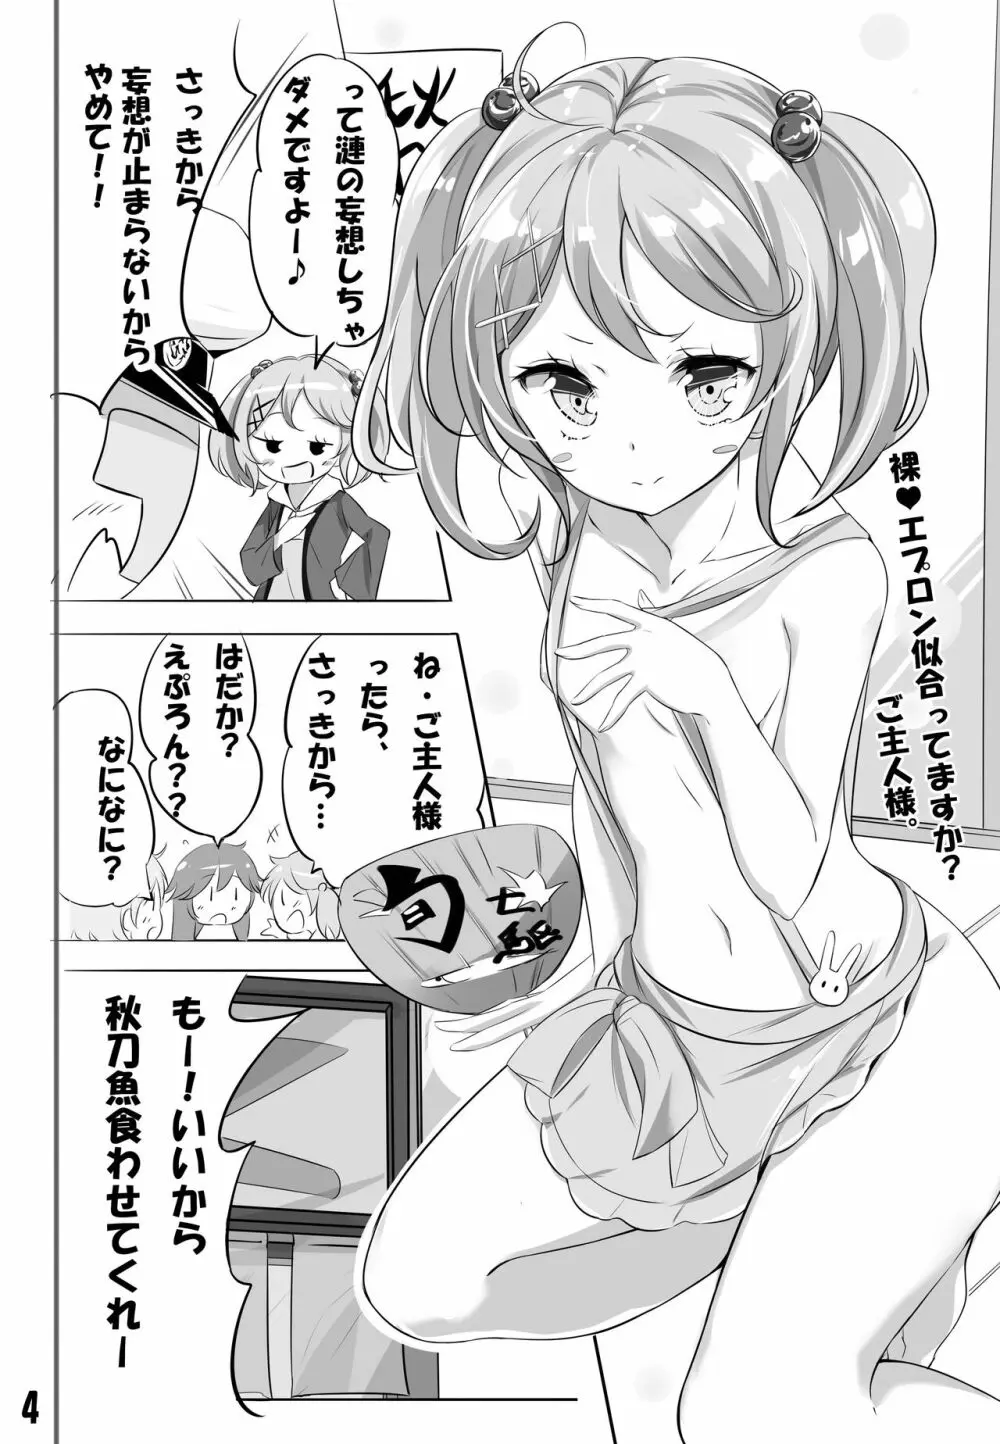 hamaken collection 総集編vol 9～12 プラス 七駆の乳くらべ - page71